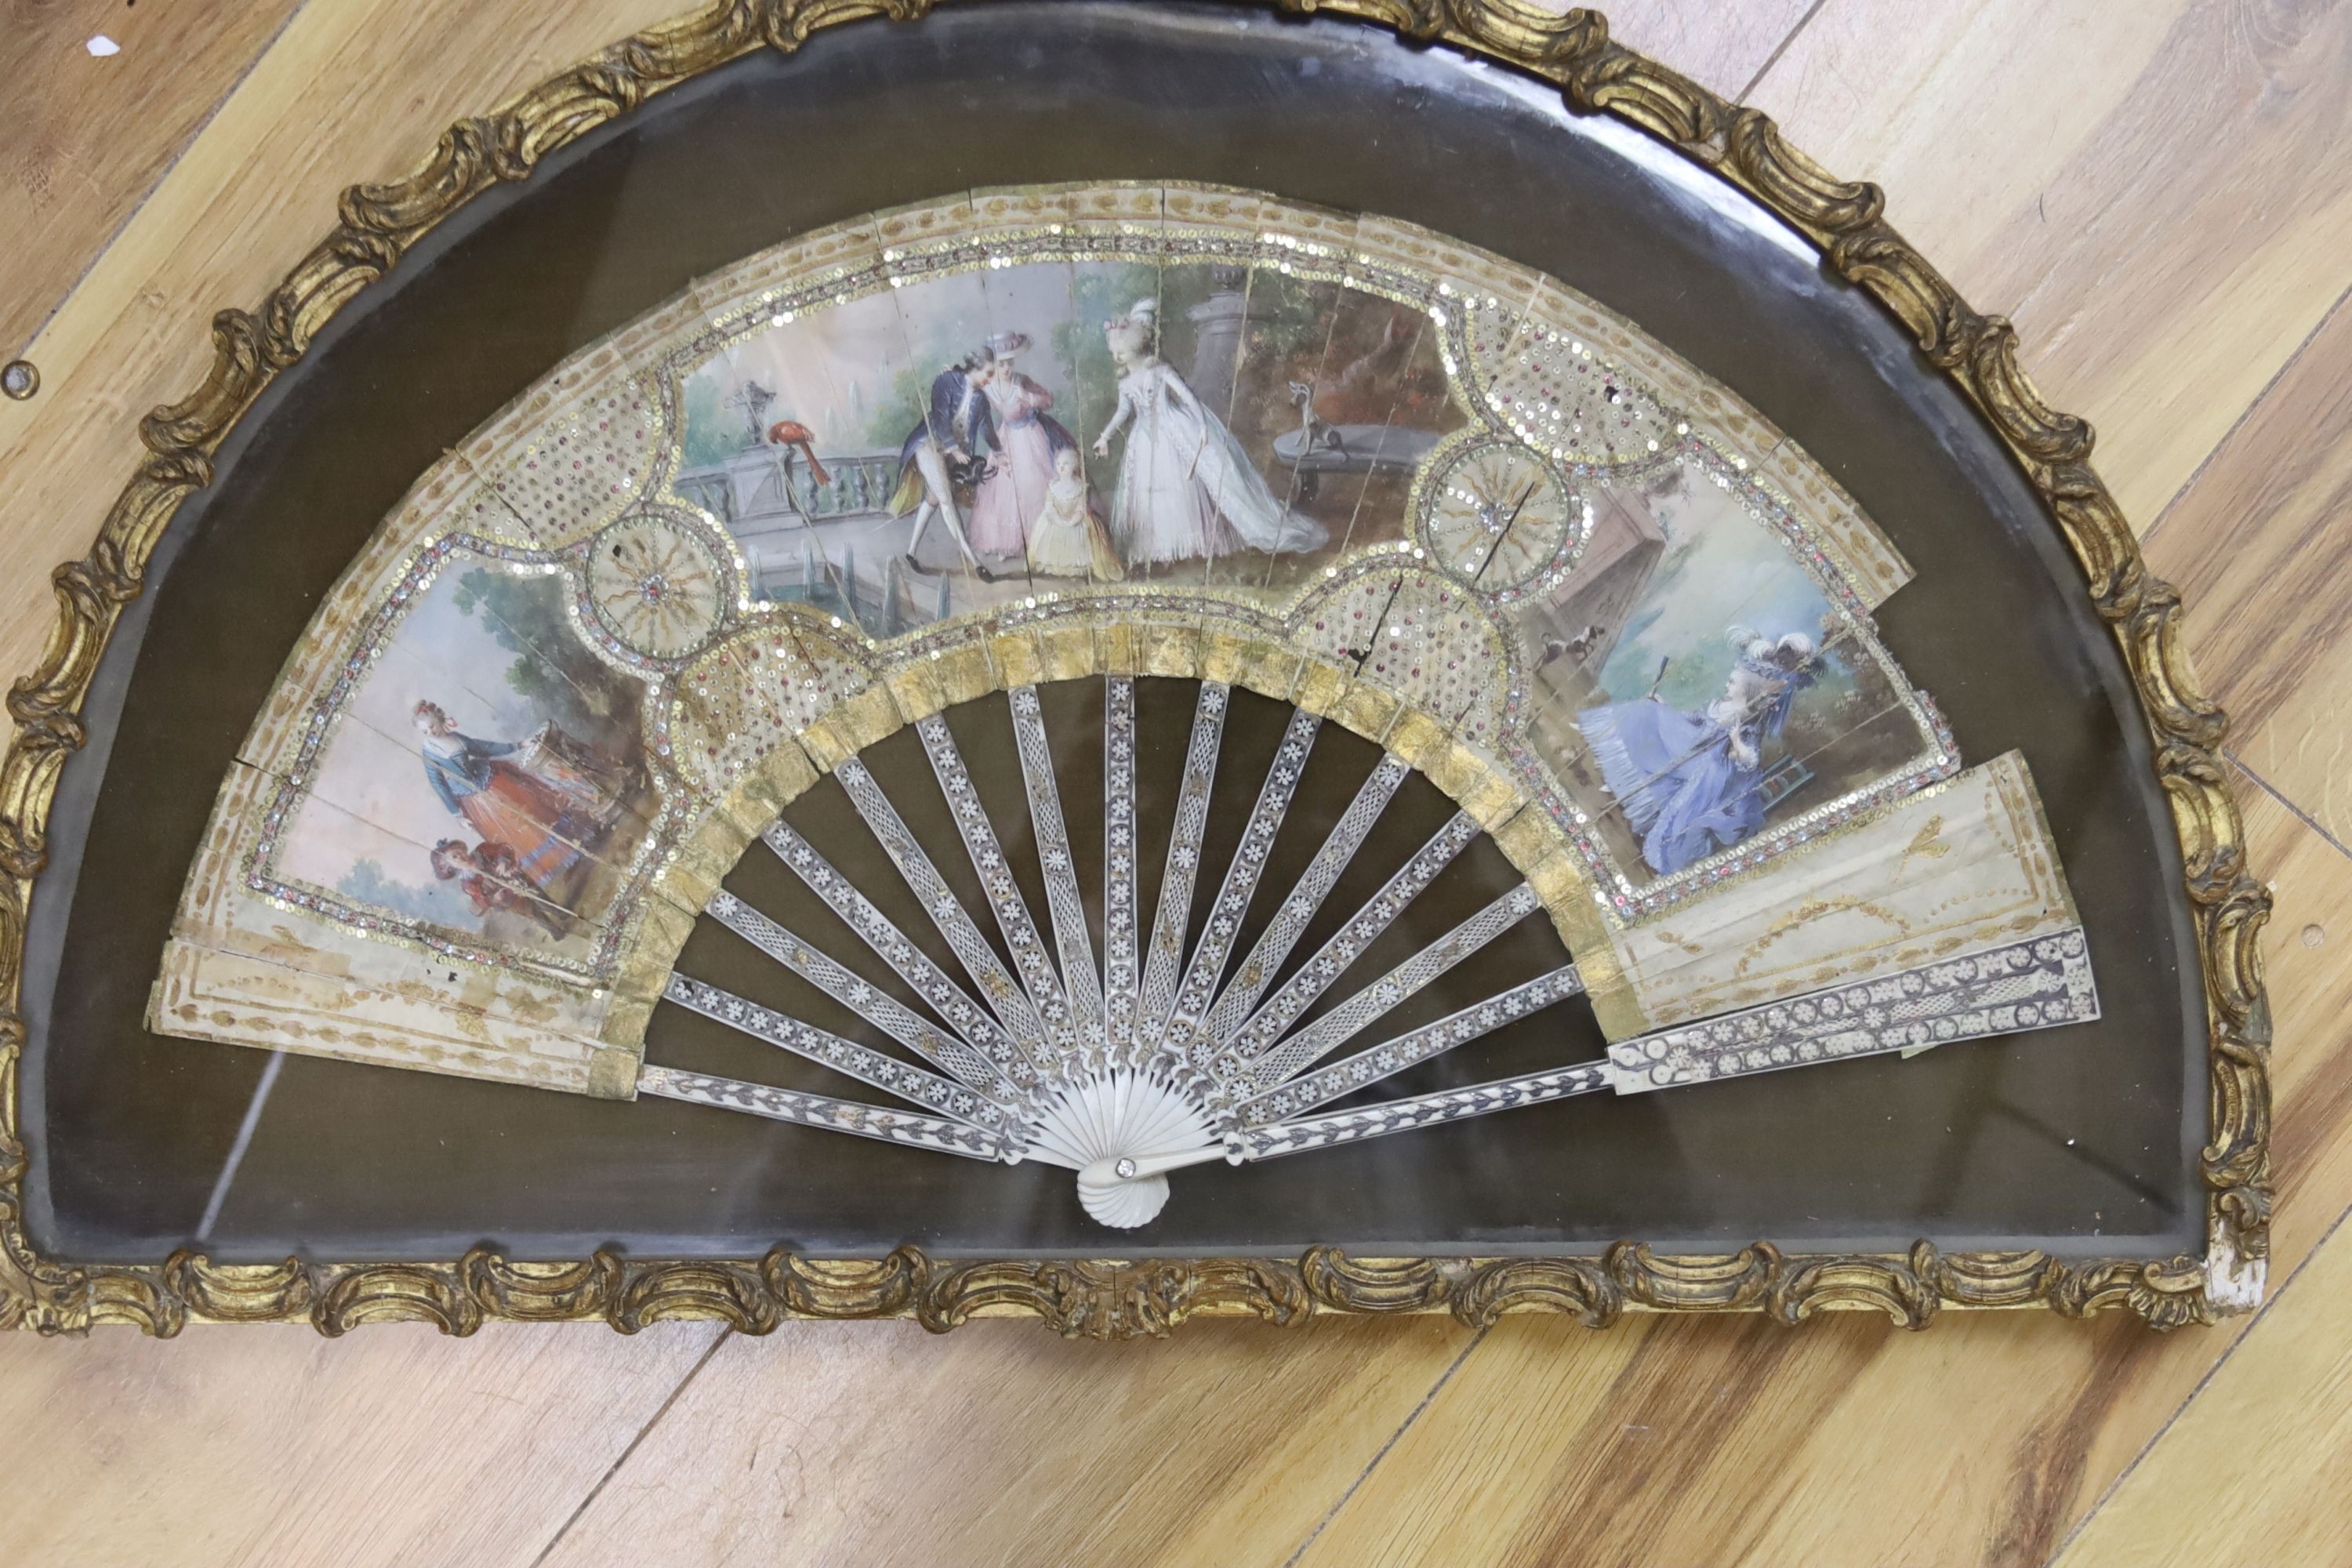 TO BE COLLECTED BY VENDOR Two late 18th/19th century French gesso framed fans with mother of pearl inlaid ivory sticks and guards with hand painted cartouche of classical figures and landscape on the fan leaves, length o